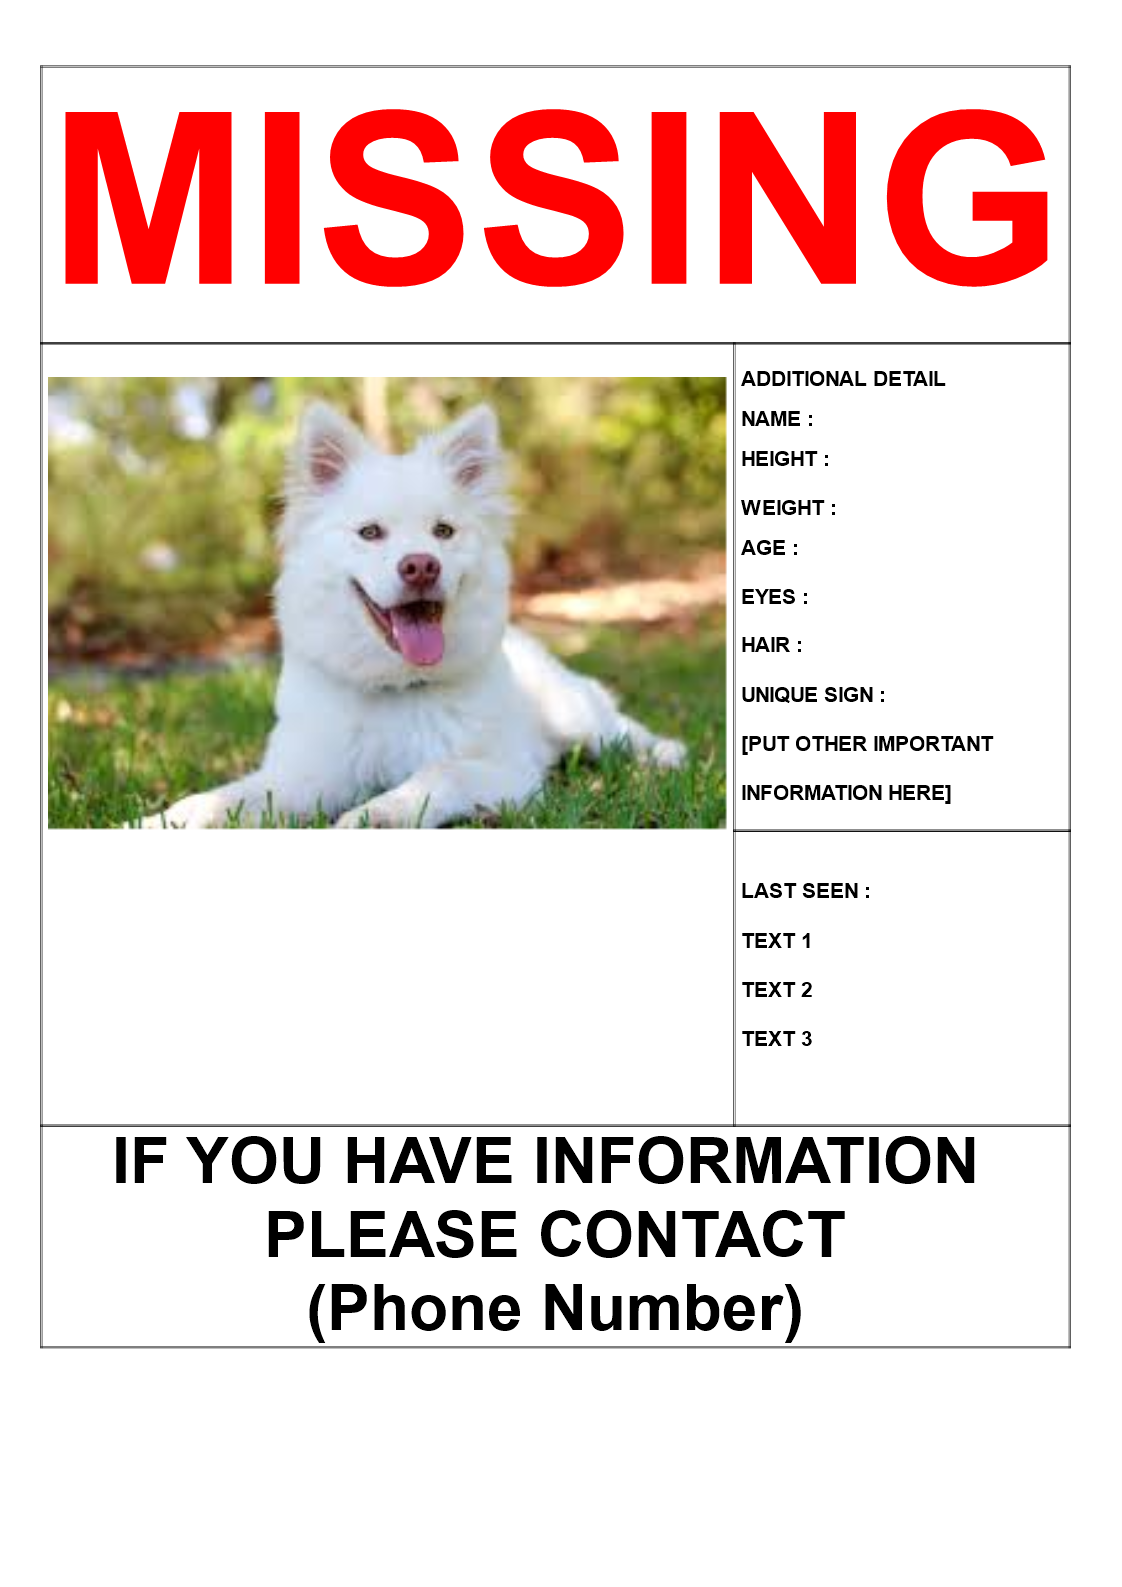 Missing pet poster template main image